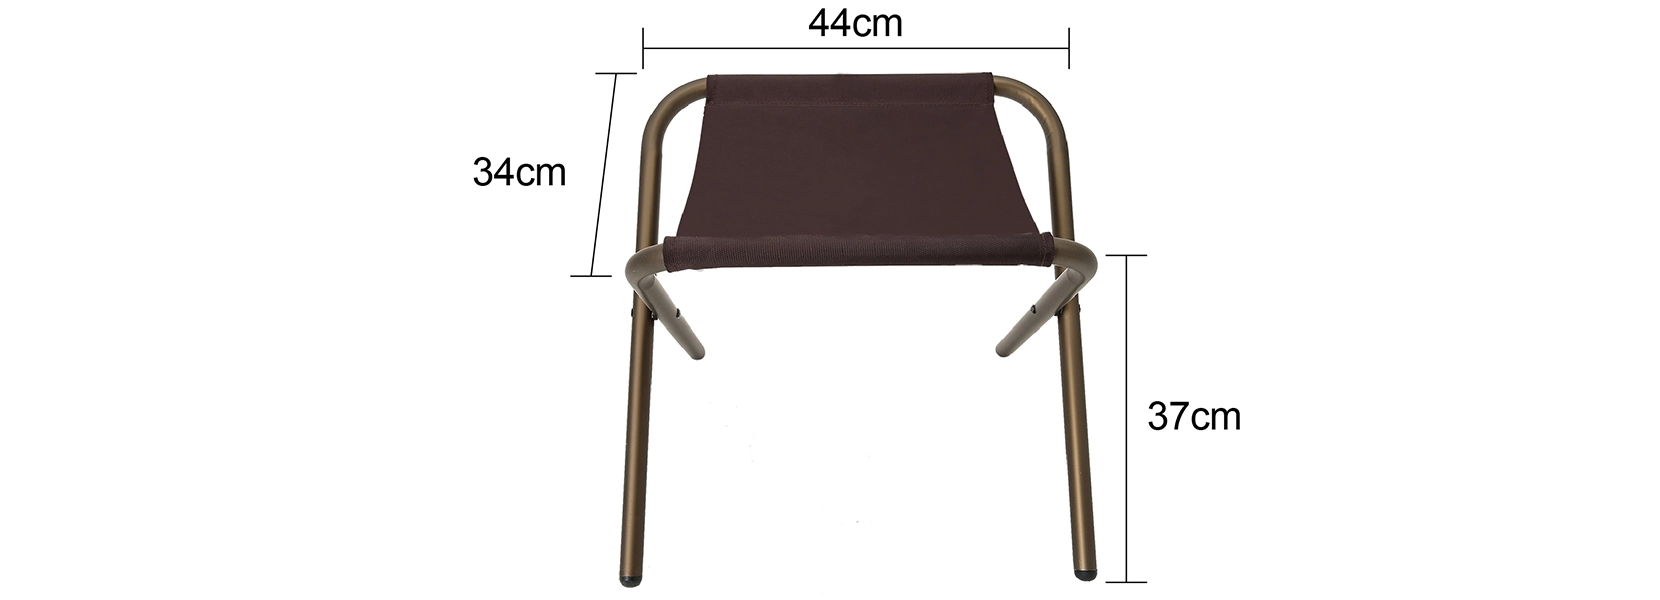 details of Portable Mini Camping Stool